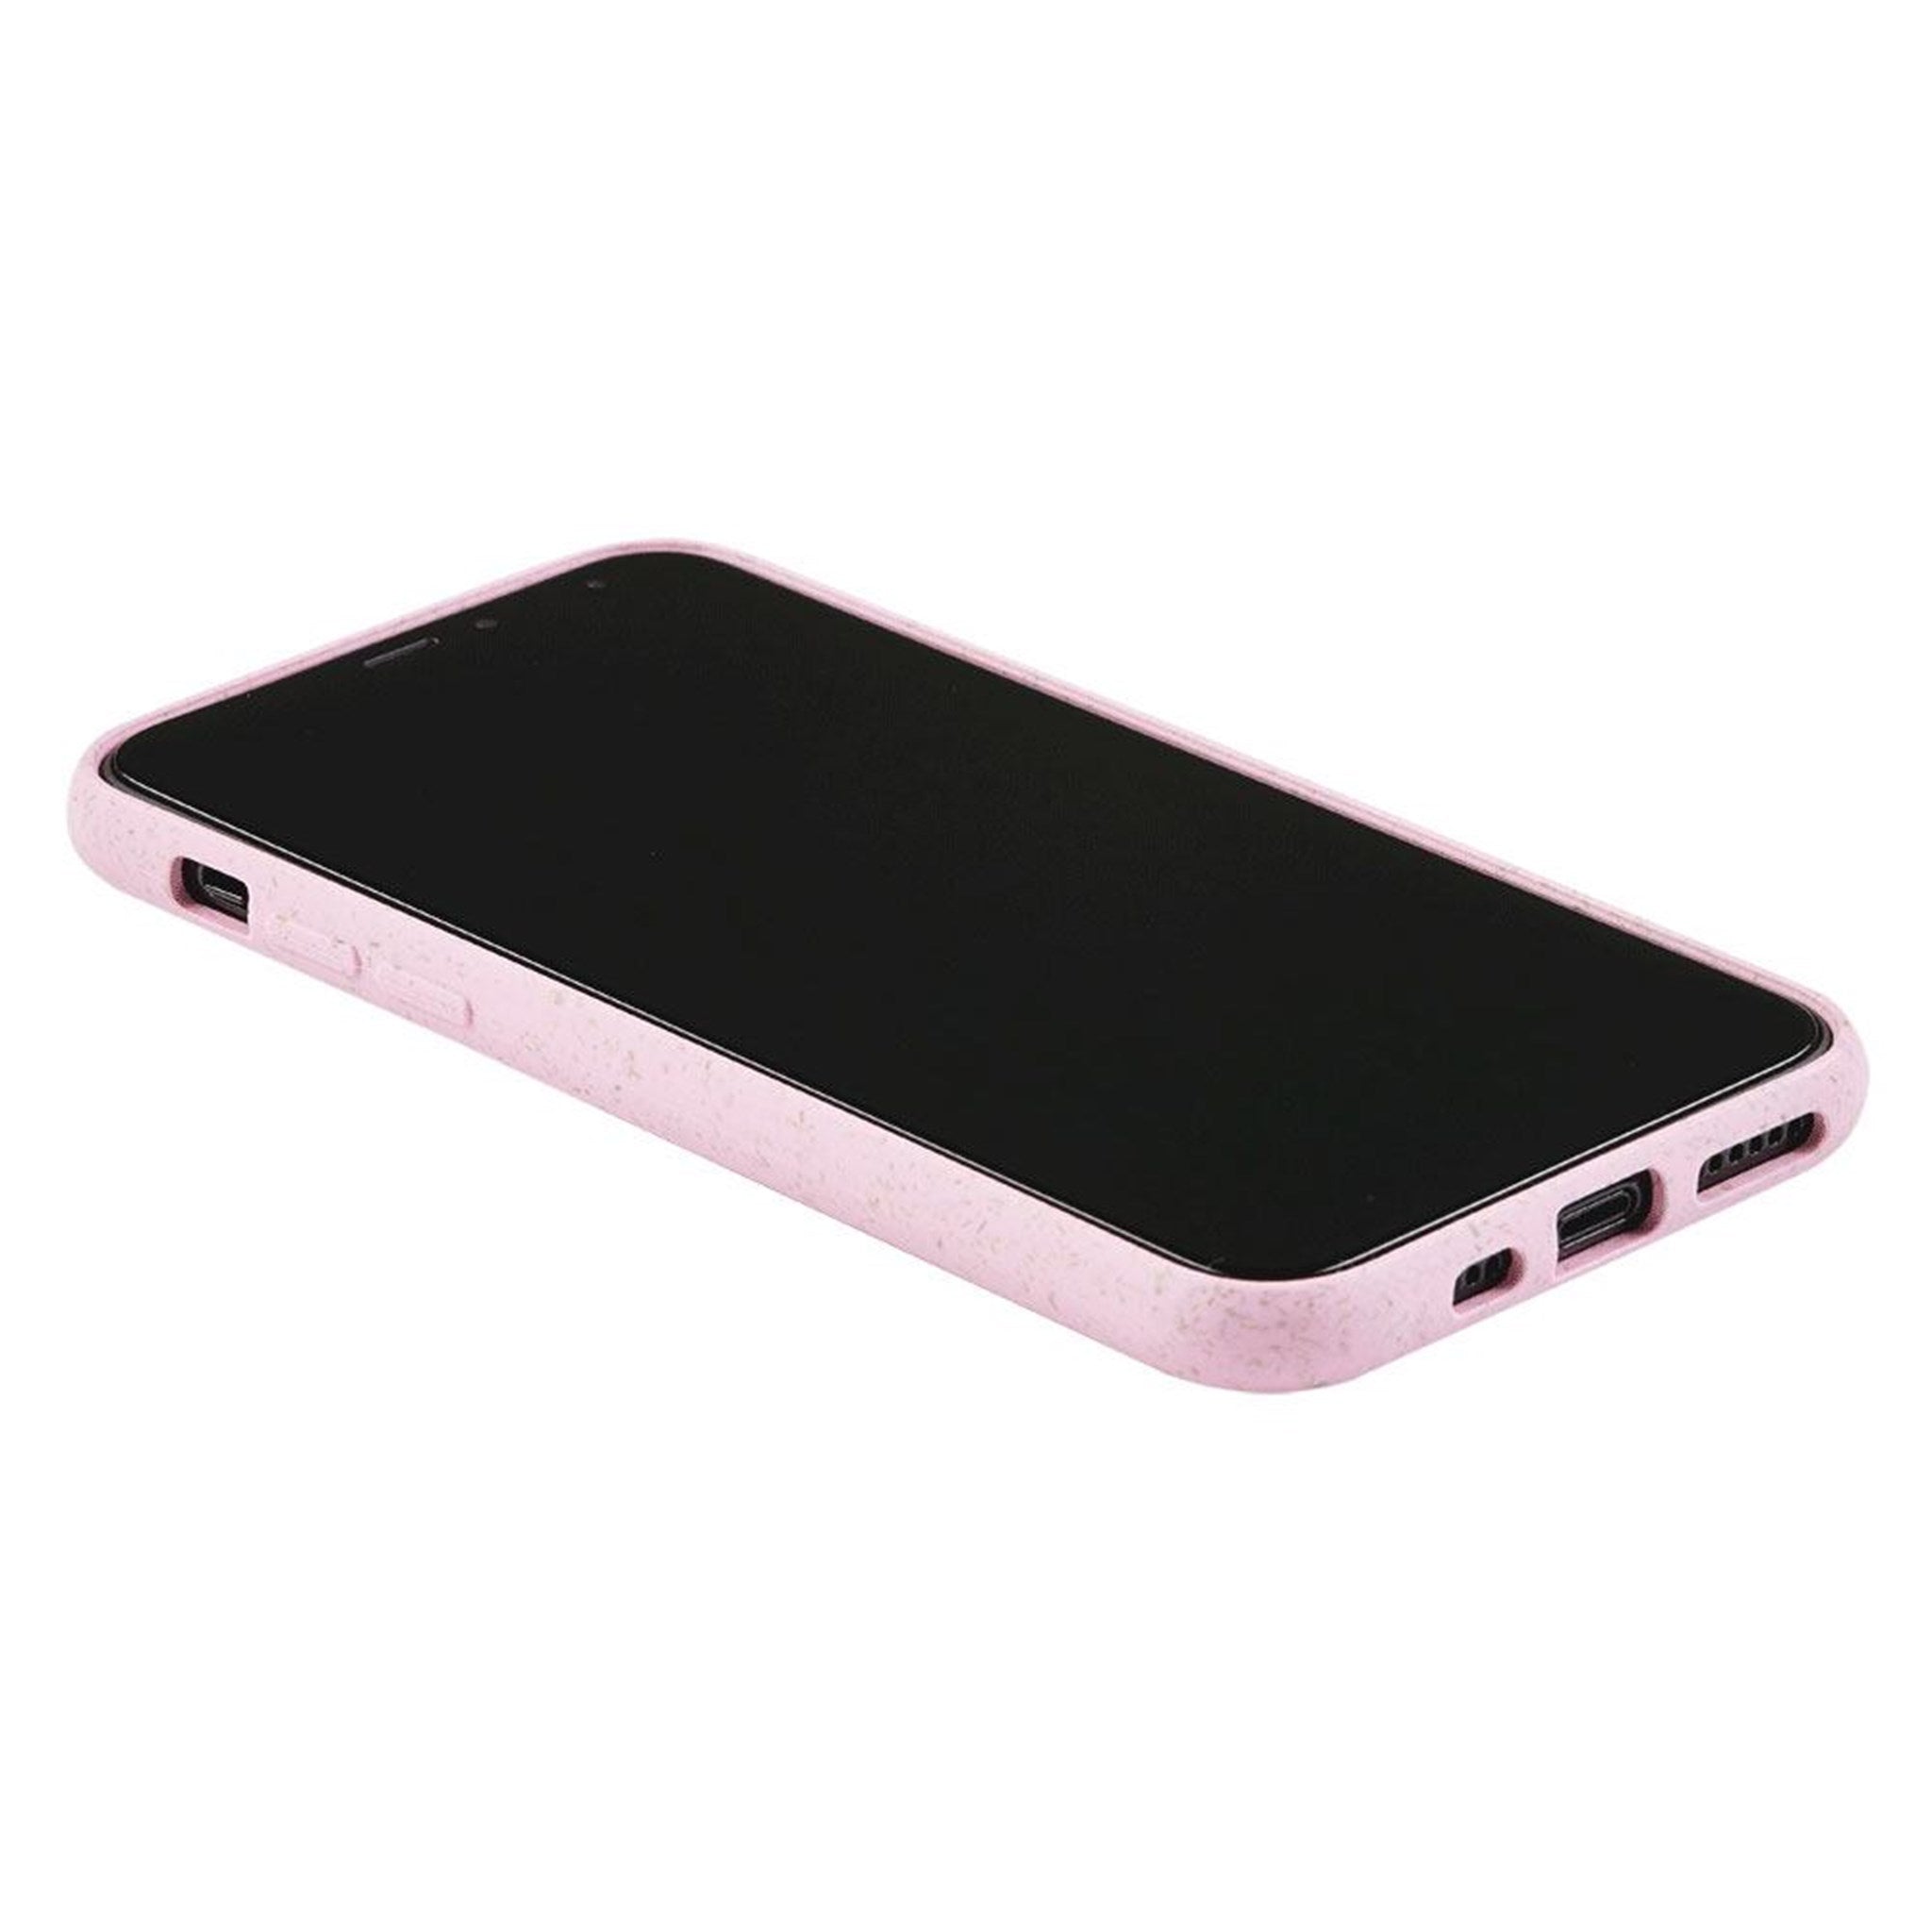 GreyLime-iPhone-11-Pro-Max-biodegradable-cover-Pink-COIP11PM05-V3.jpg